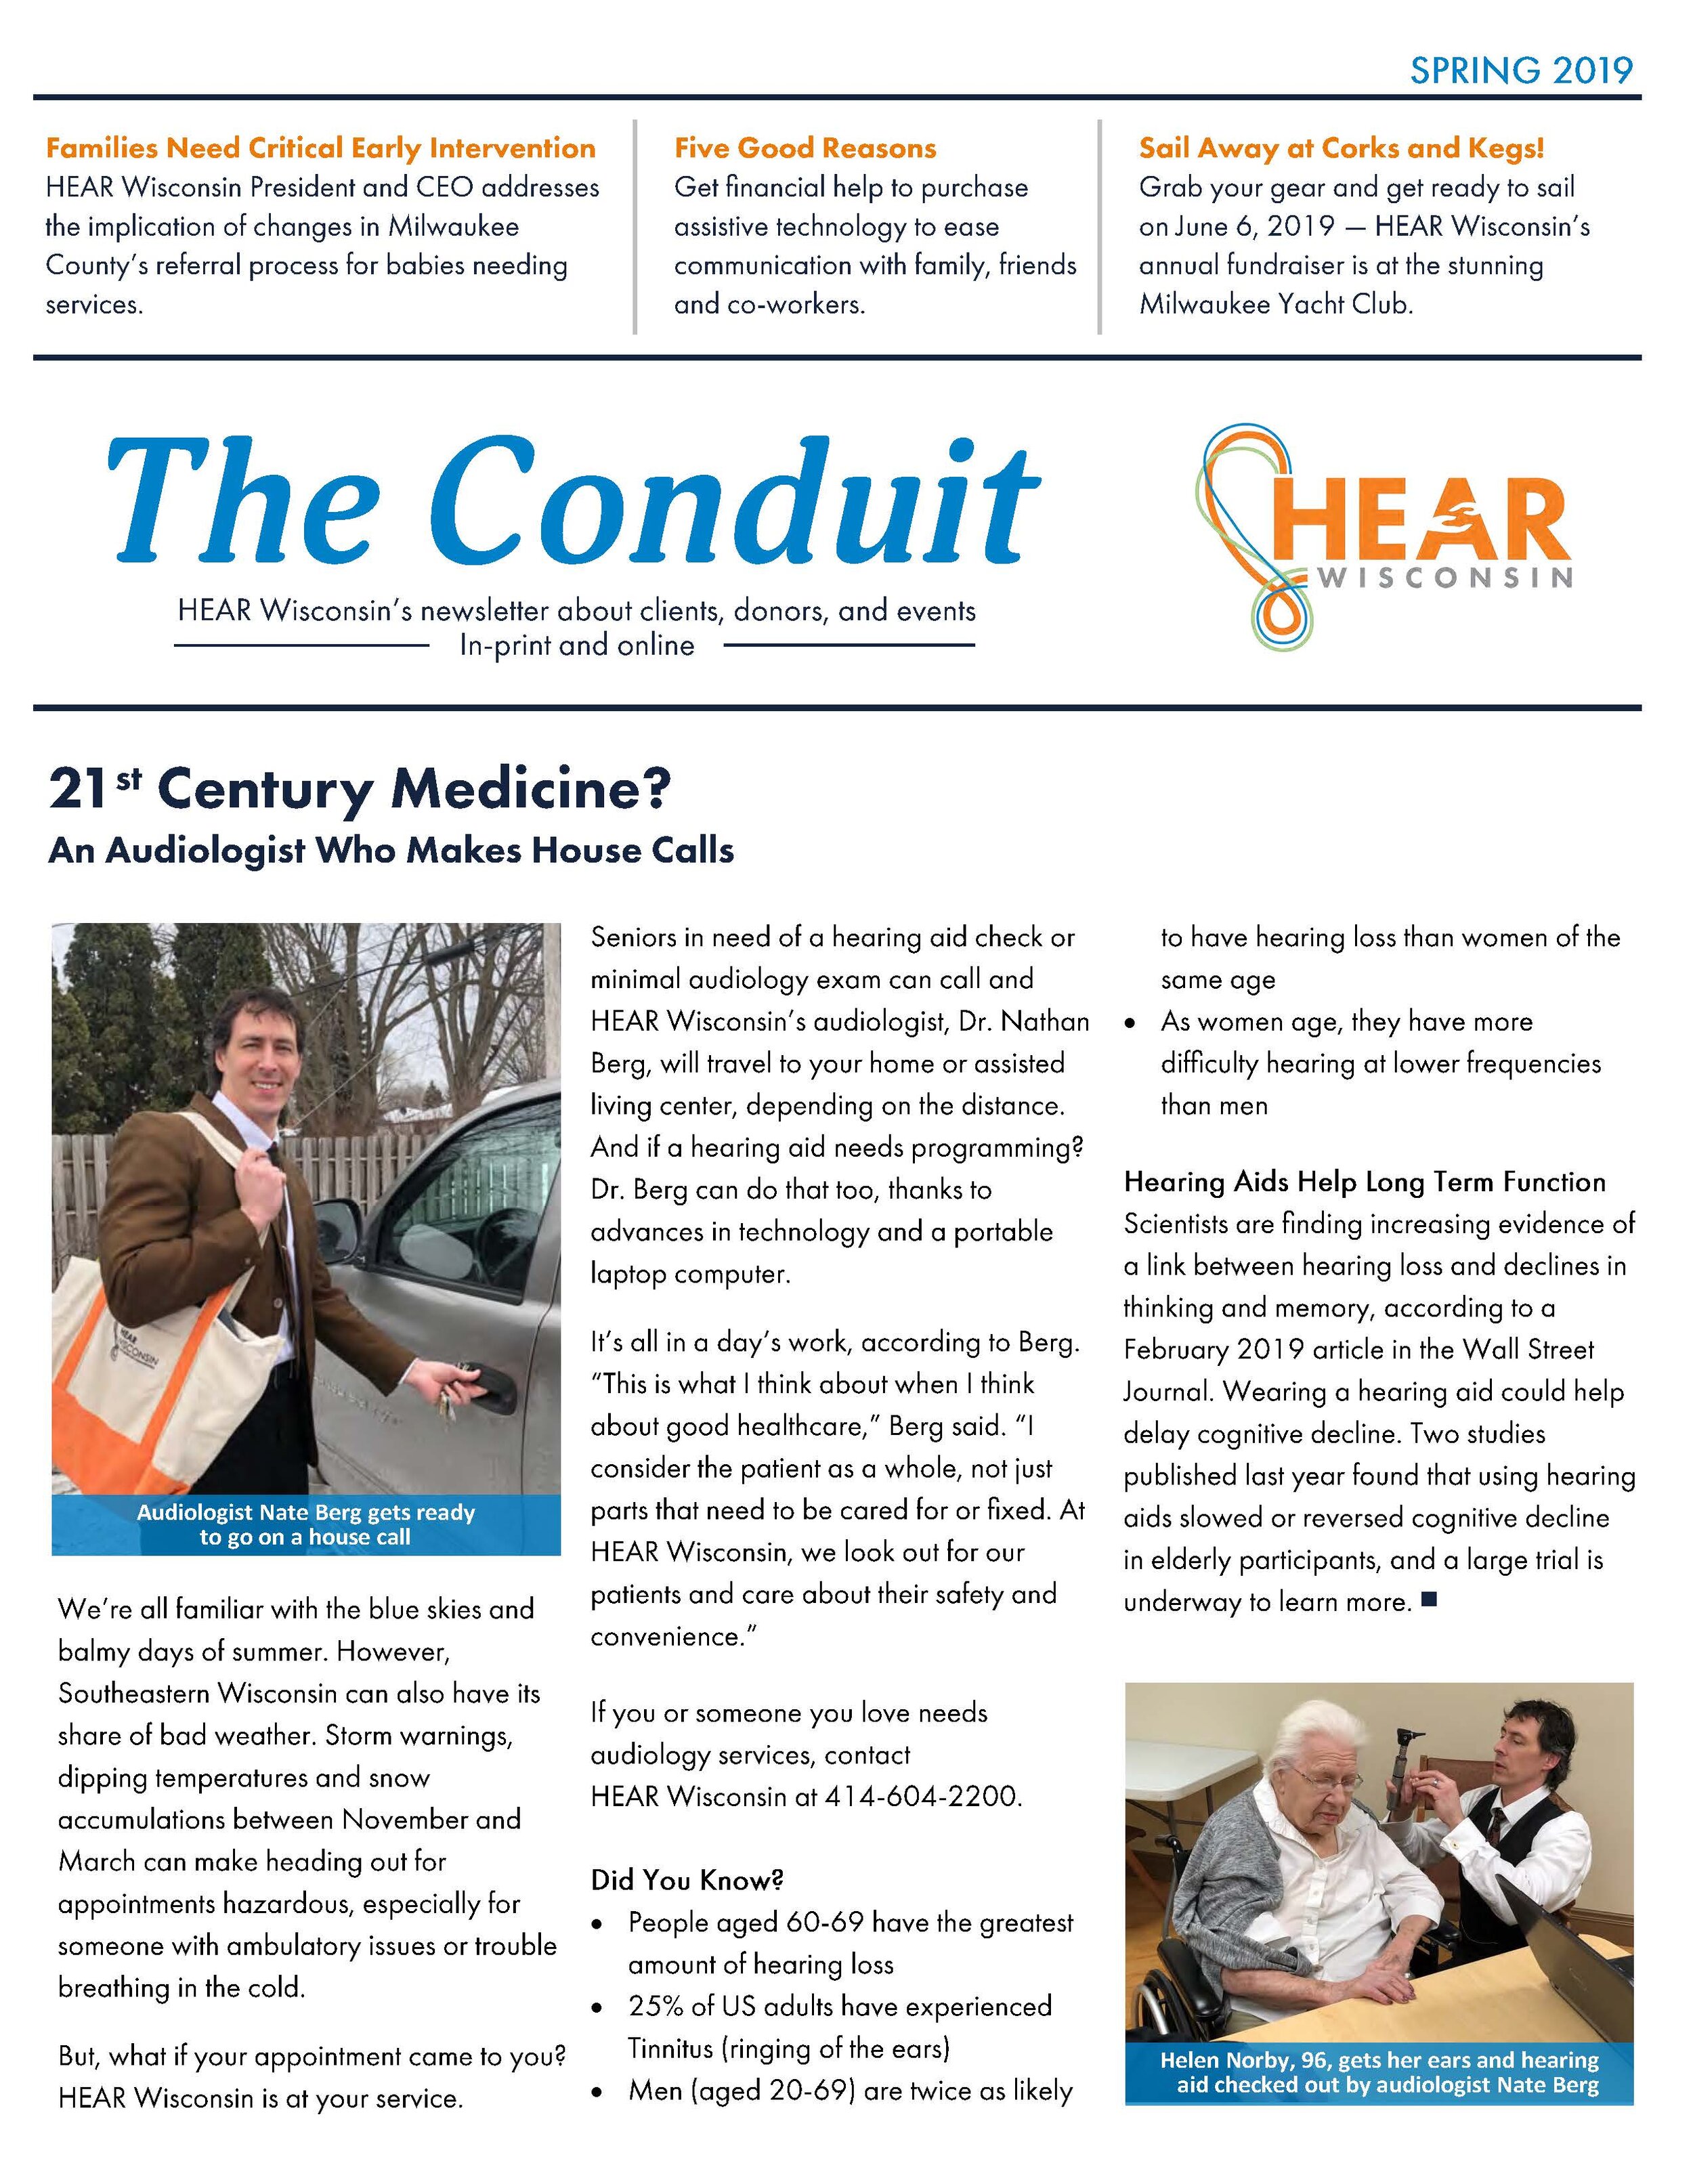 The Conduit Newsletter - Spring 2019